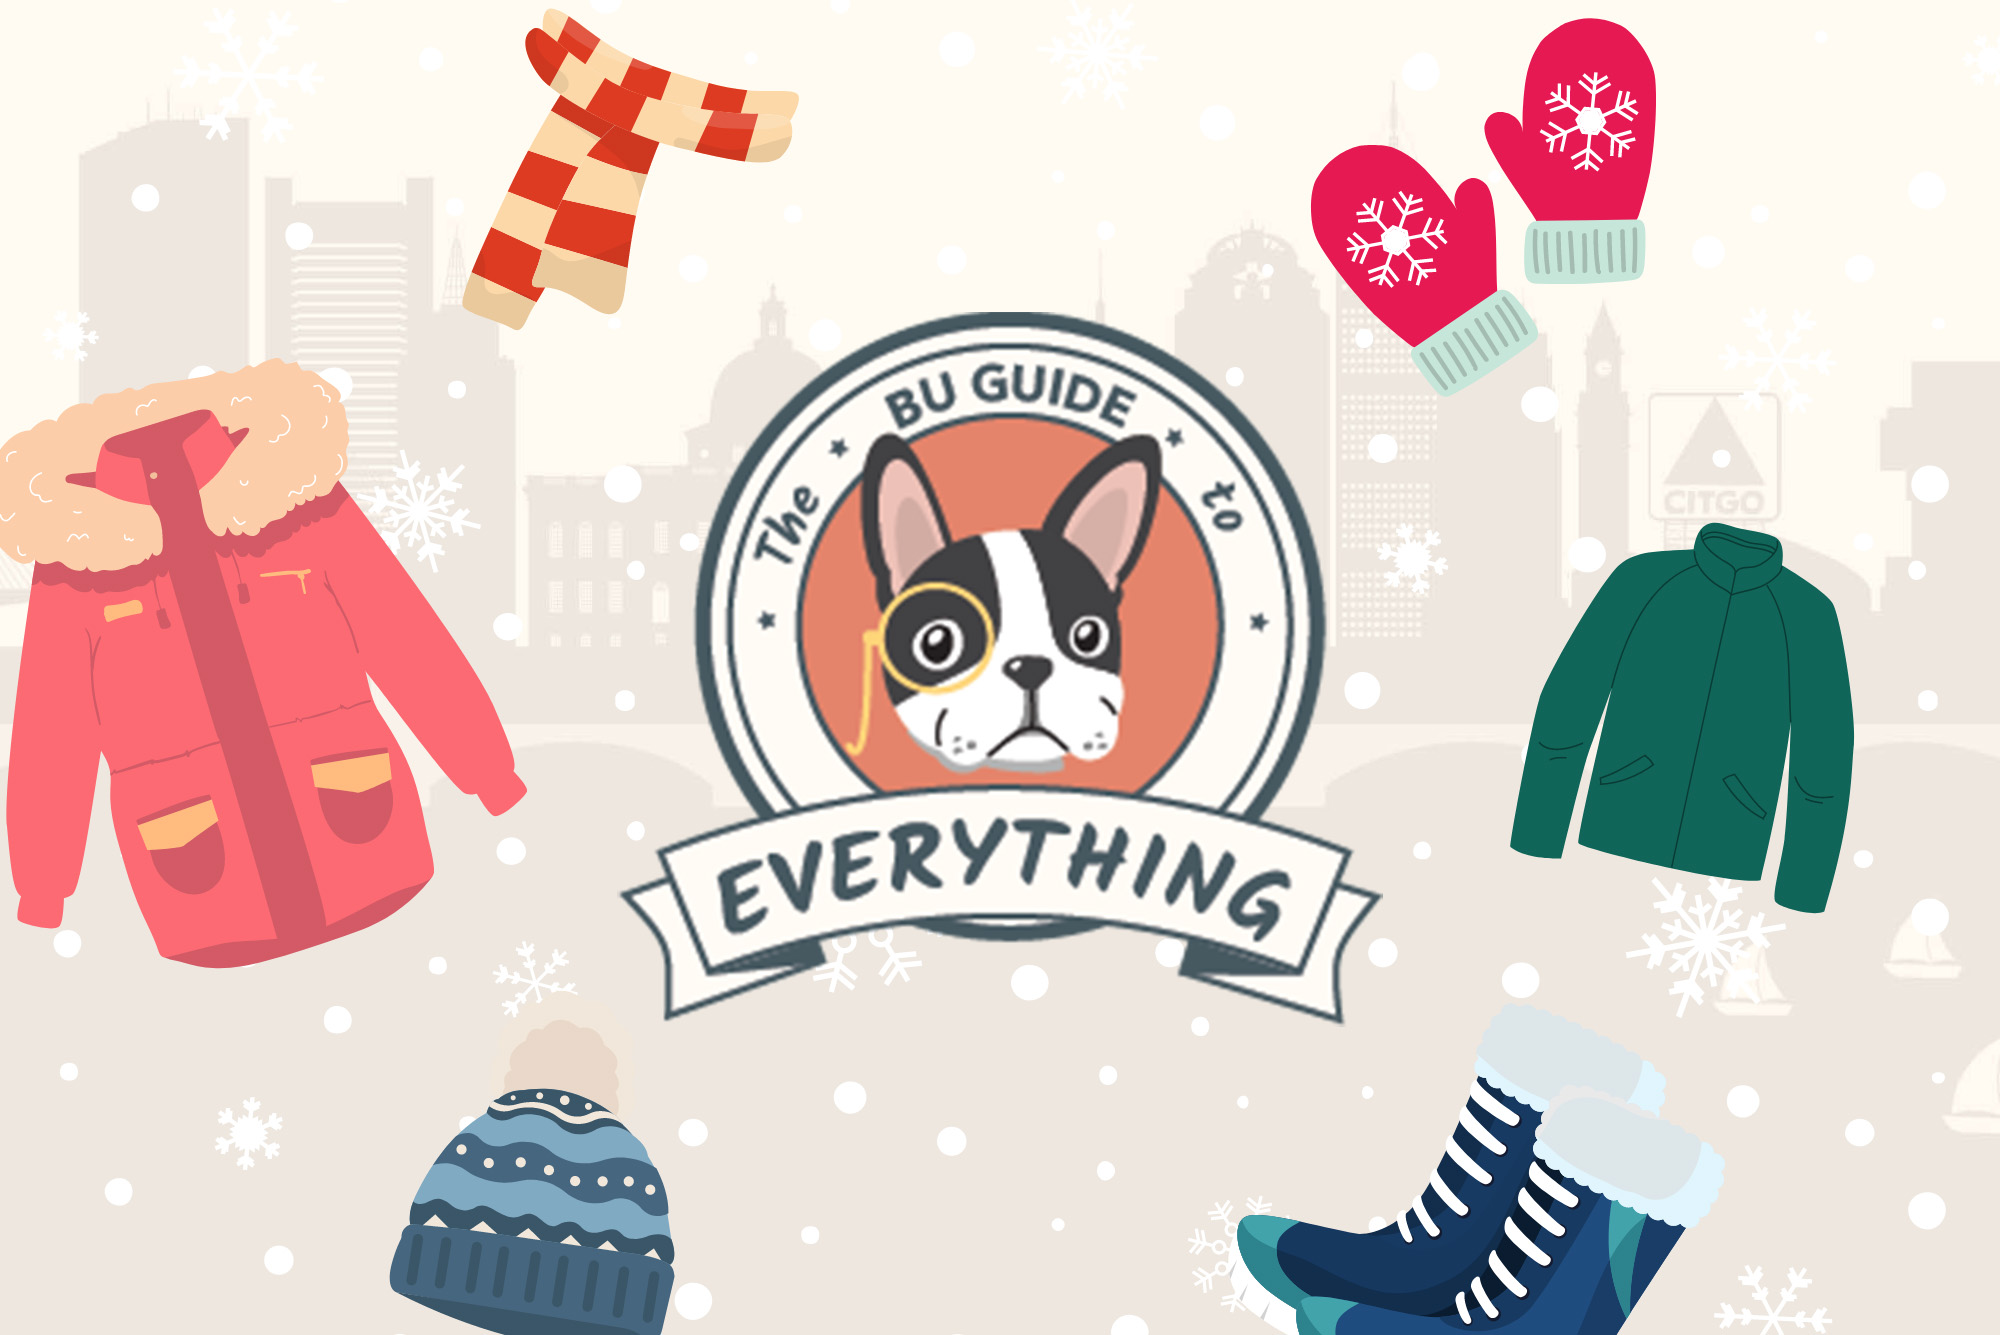 Image: Vector illustration shows a light beige background showing a Boston city Skyline. Whit snowflakes cover the background. Various illustrated icons of winter essentials such as gloves, hats, coats and boats decorate the image. In the center sits an illustrated logo features a vector Boston Terrier dog head. The Terrier wears a yellow monocle over it's left eye. The dog head sits in a scarlet circle. Border around the red circle is shown as a banner. Banner reads "The BU Guide to Everything".